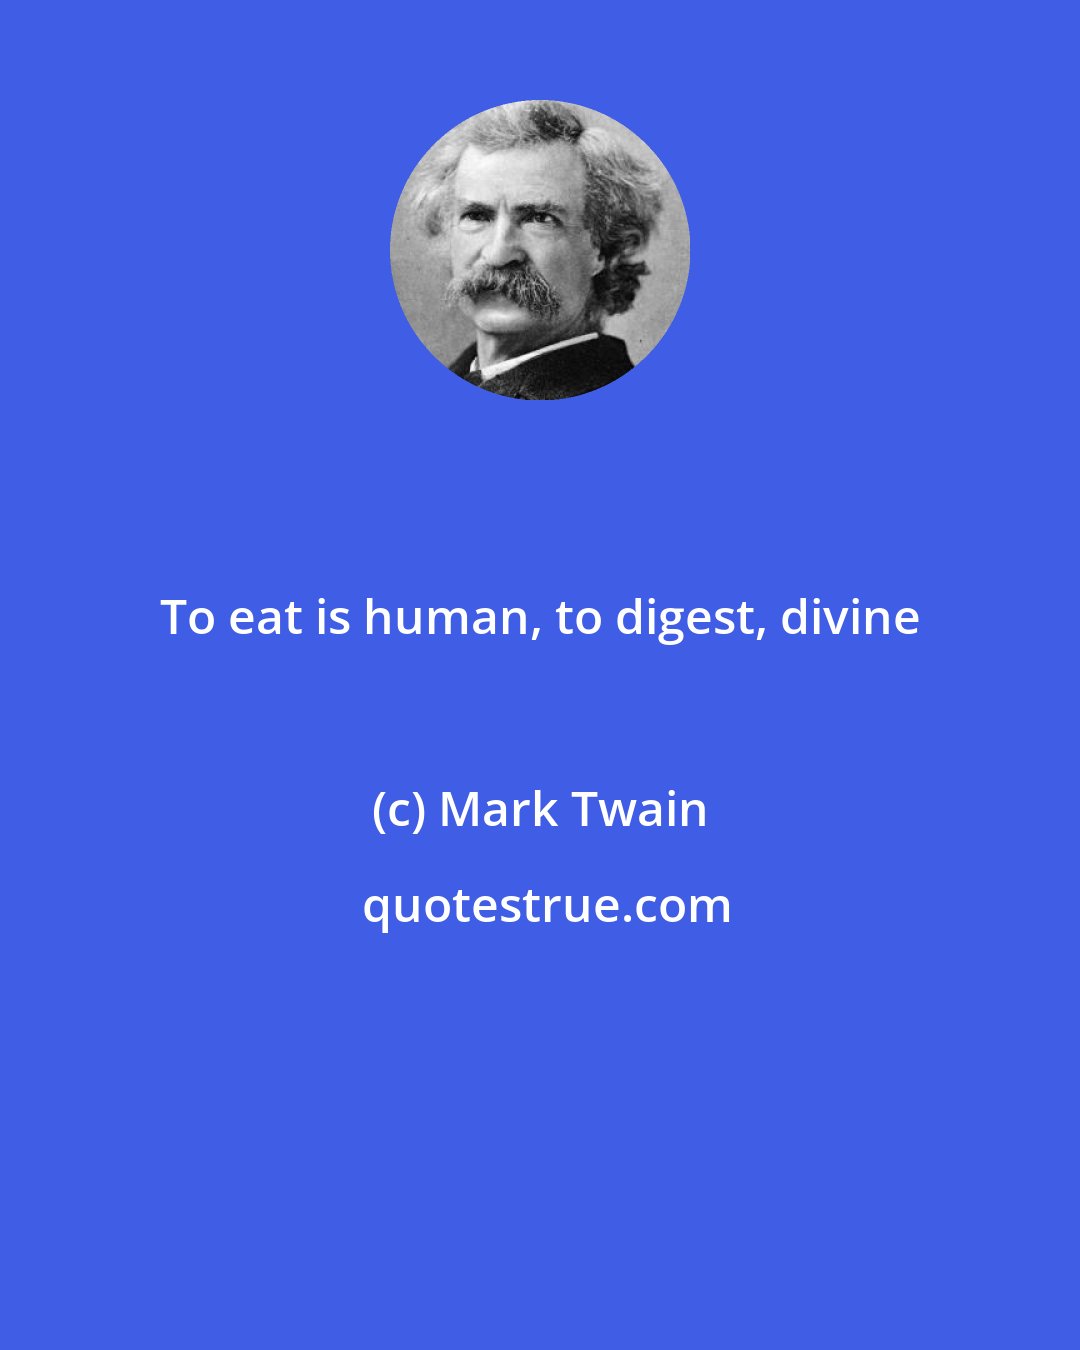 Mark Twain: To eat is human, to digest, divine